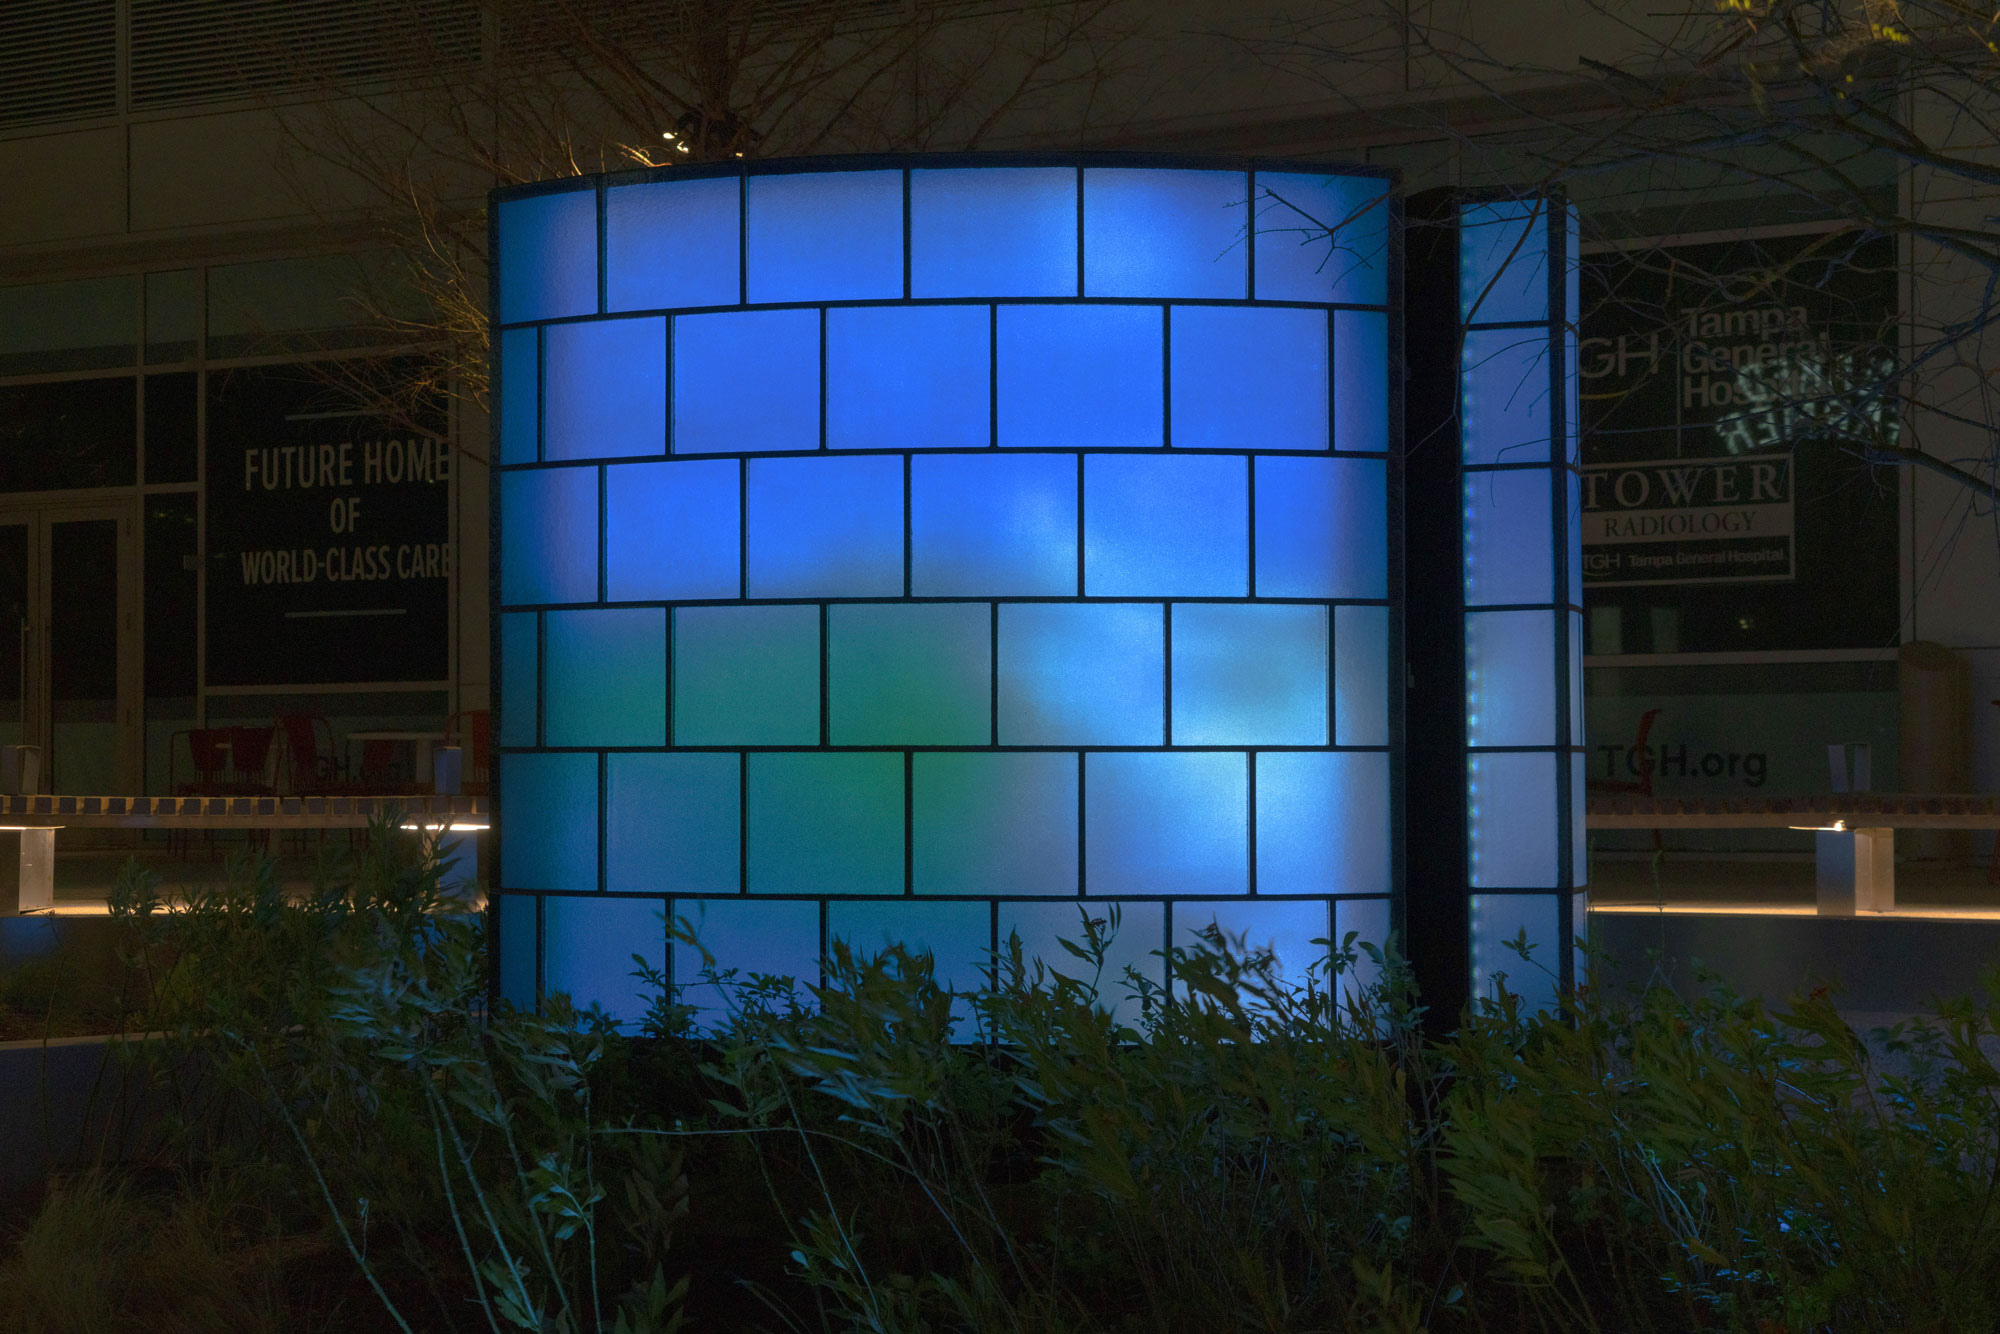 Pixelated: The LED Art of Jim Campbell